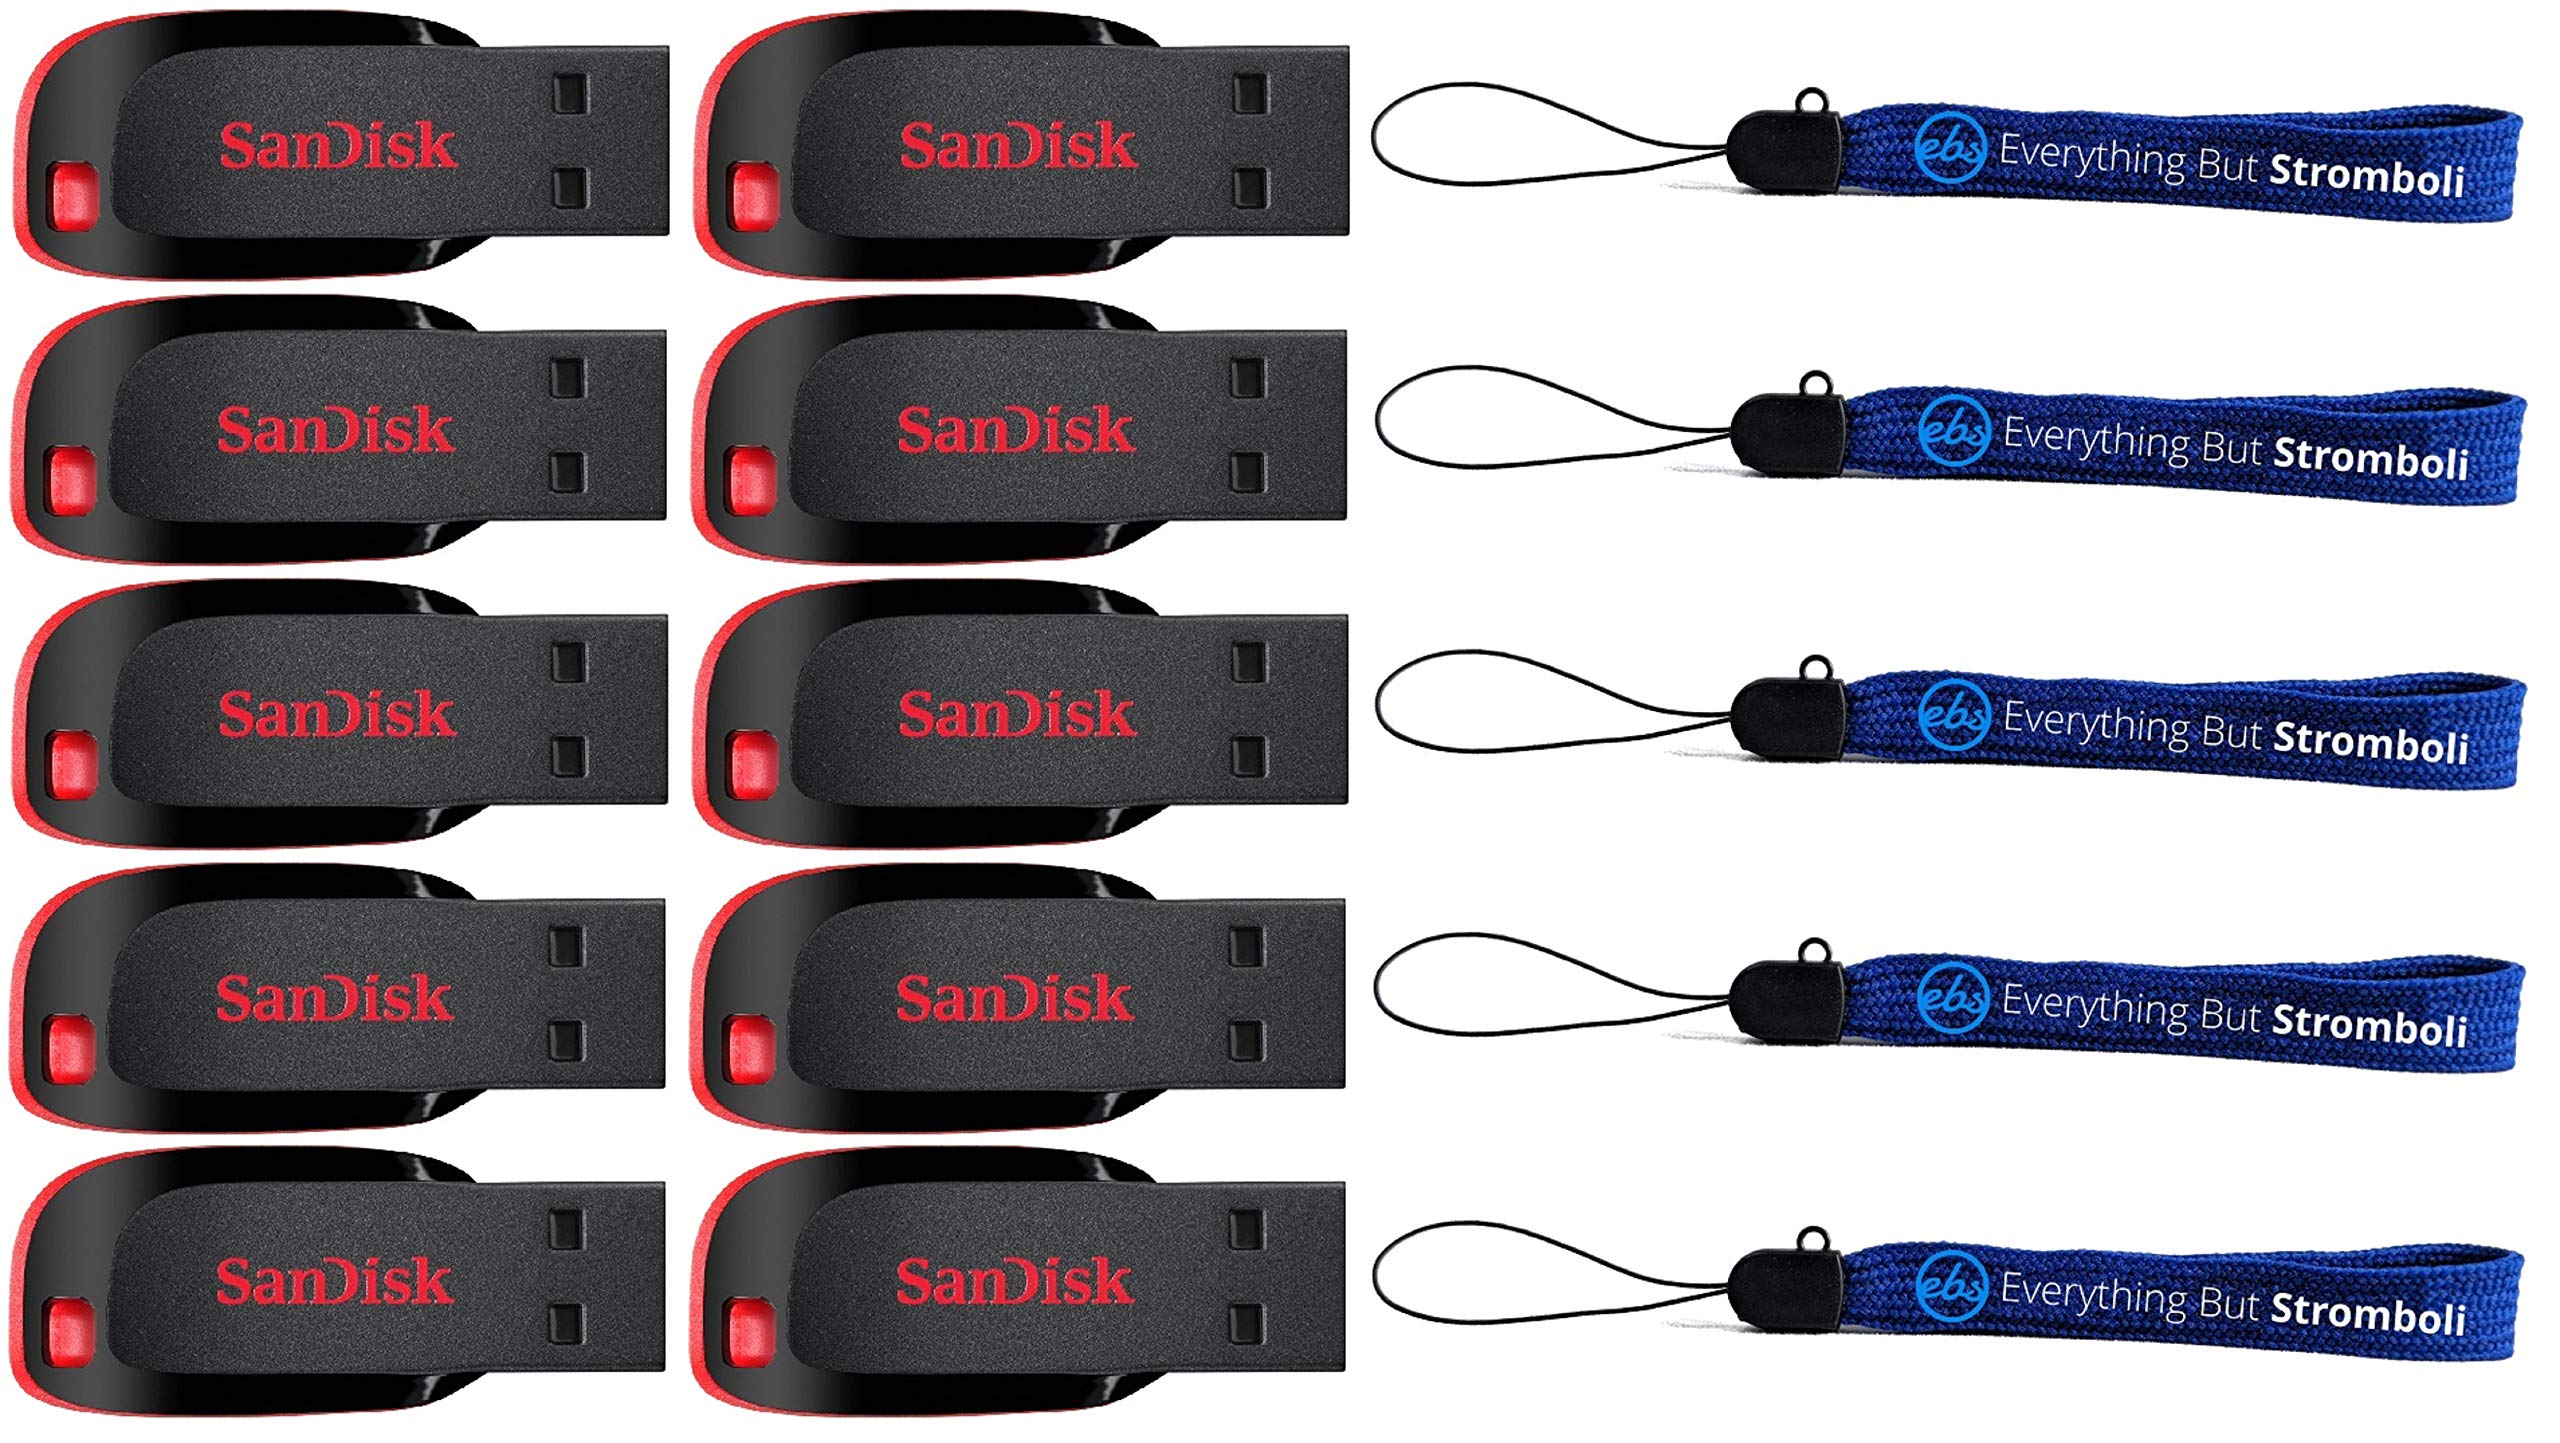 Book Cover SanDisk Cruzer Blade 16GB (10 Pack) USB 2.0 Flash Drive Jump Drive Pen Drive SDCZ50-016G - Ten Pack Bundle with (5) Everything But Stromboli Lanyards 16GB 10 Pack